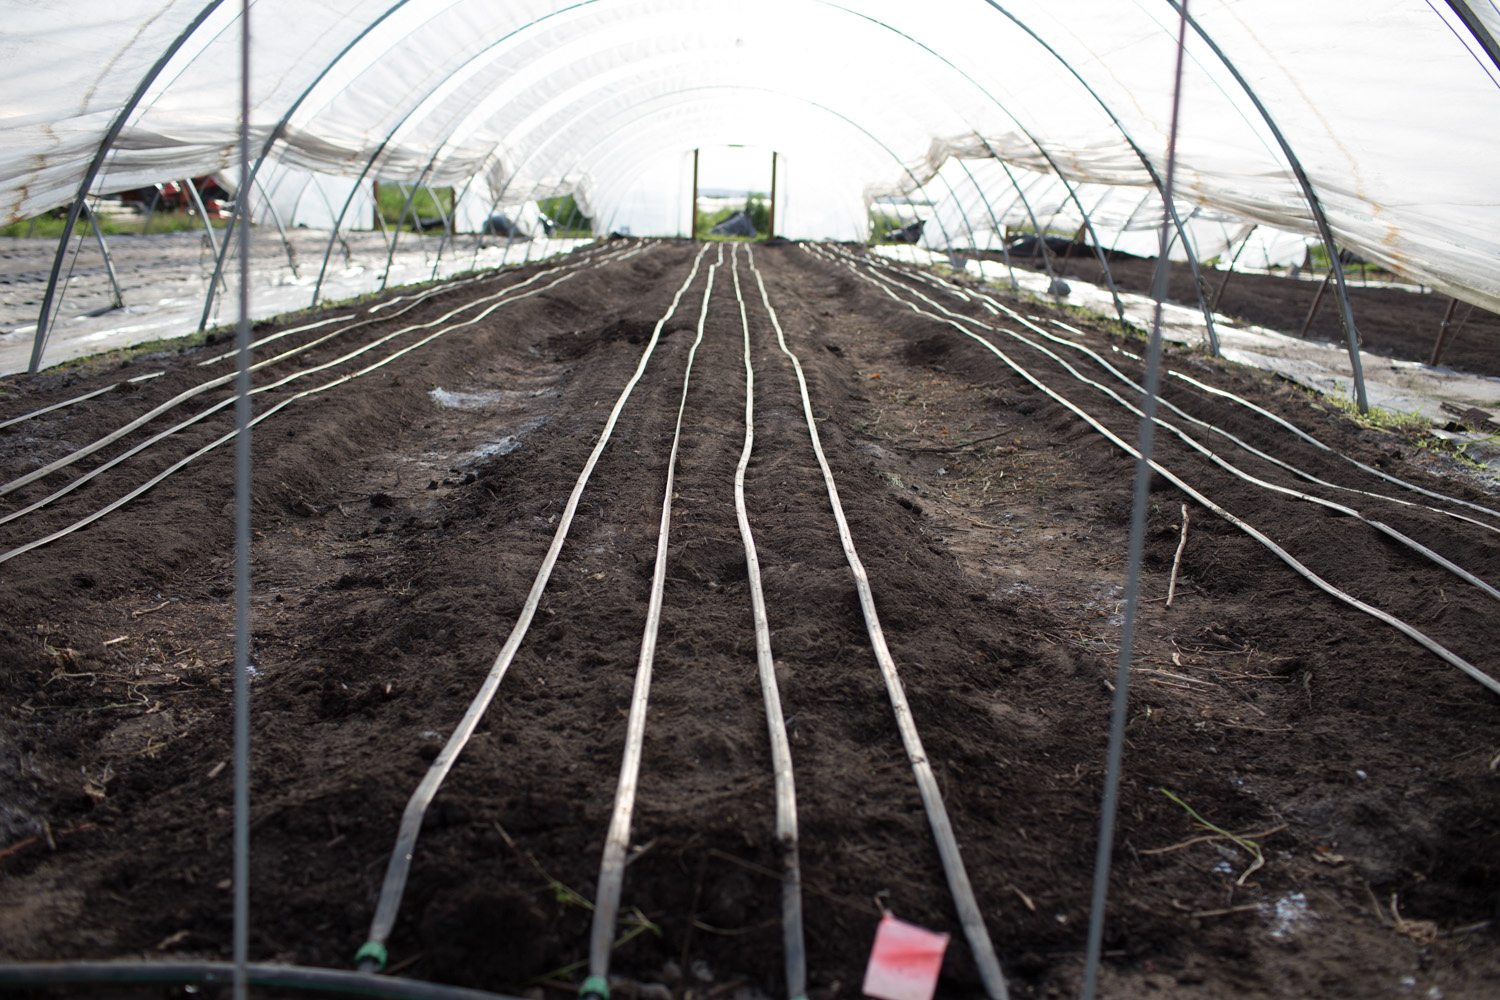 Drip irrigation setup in a greenhouse